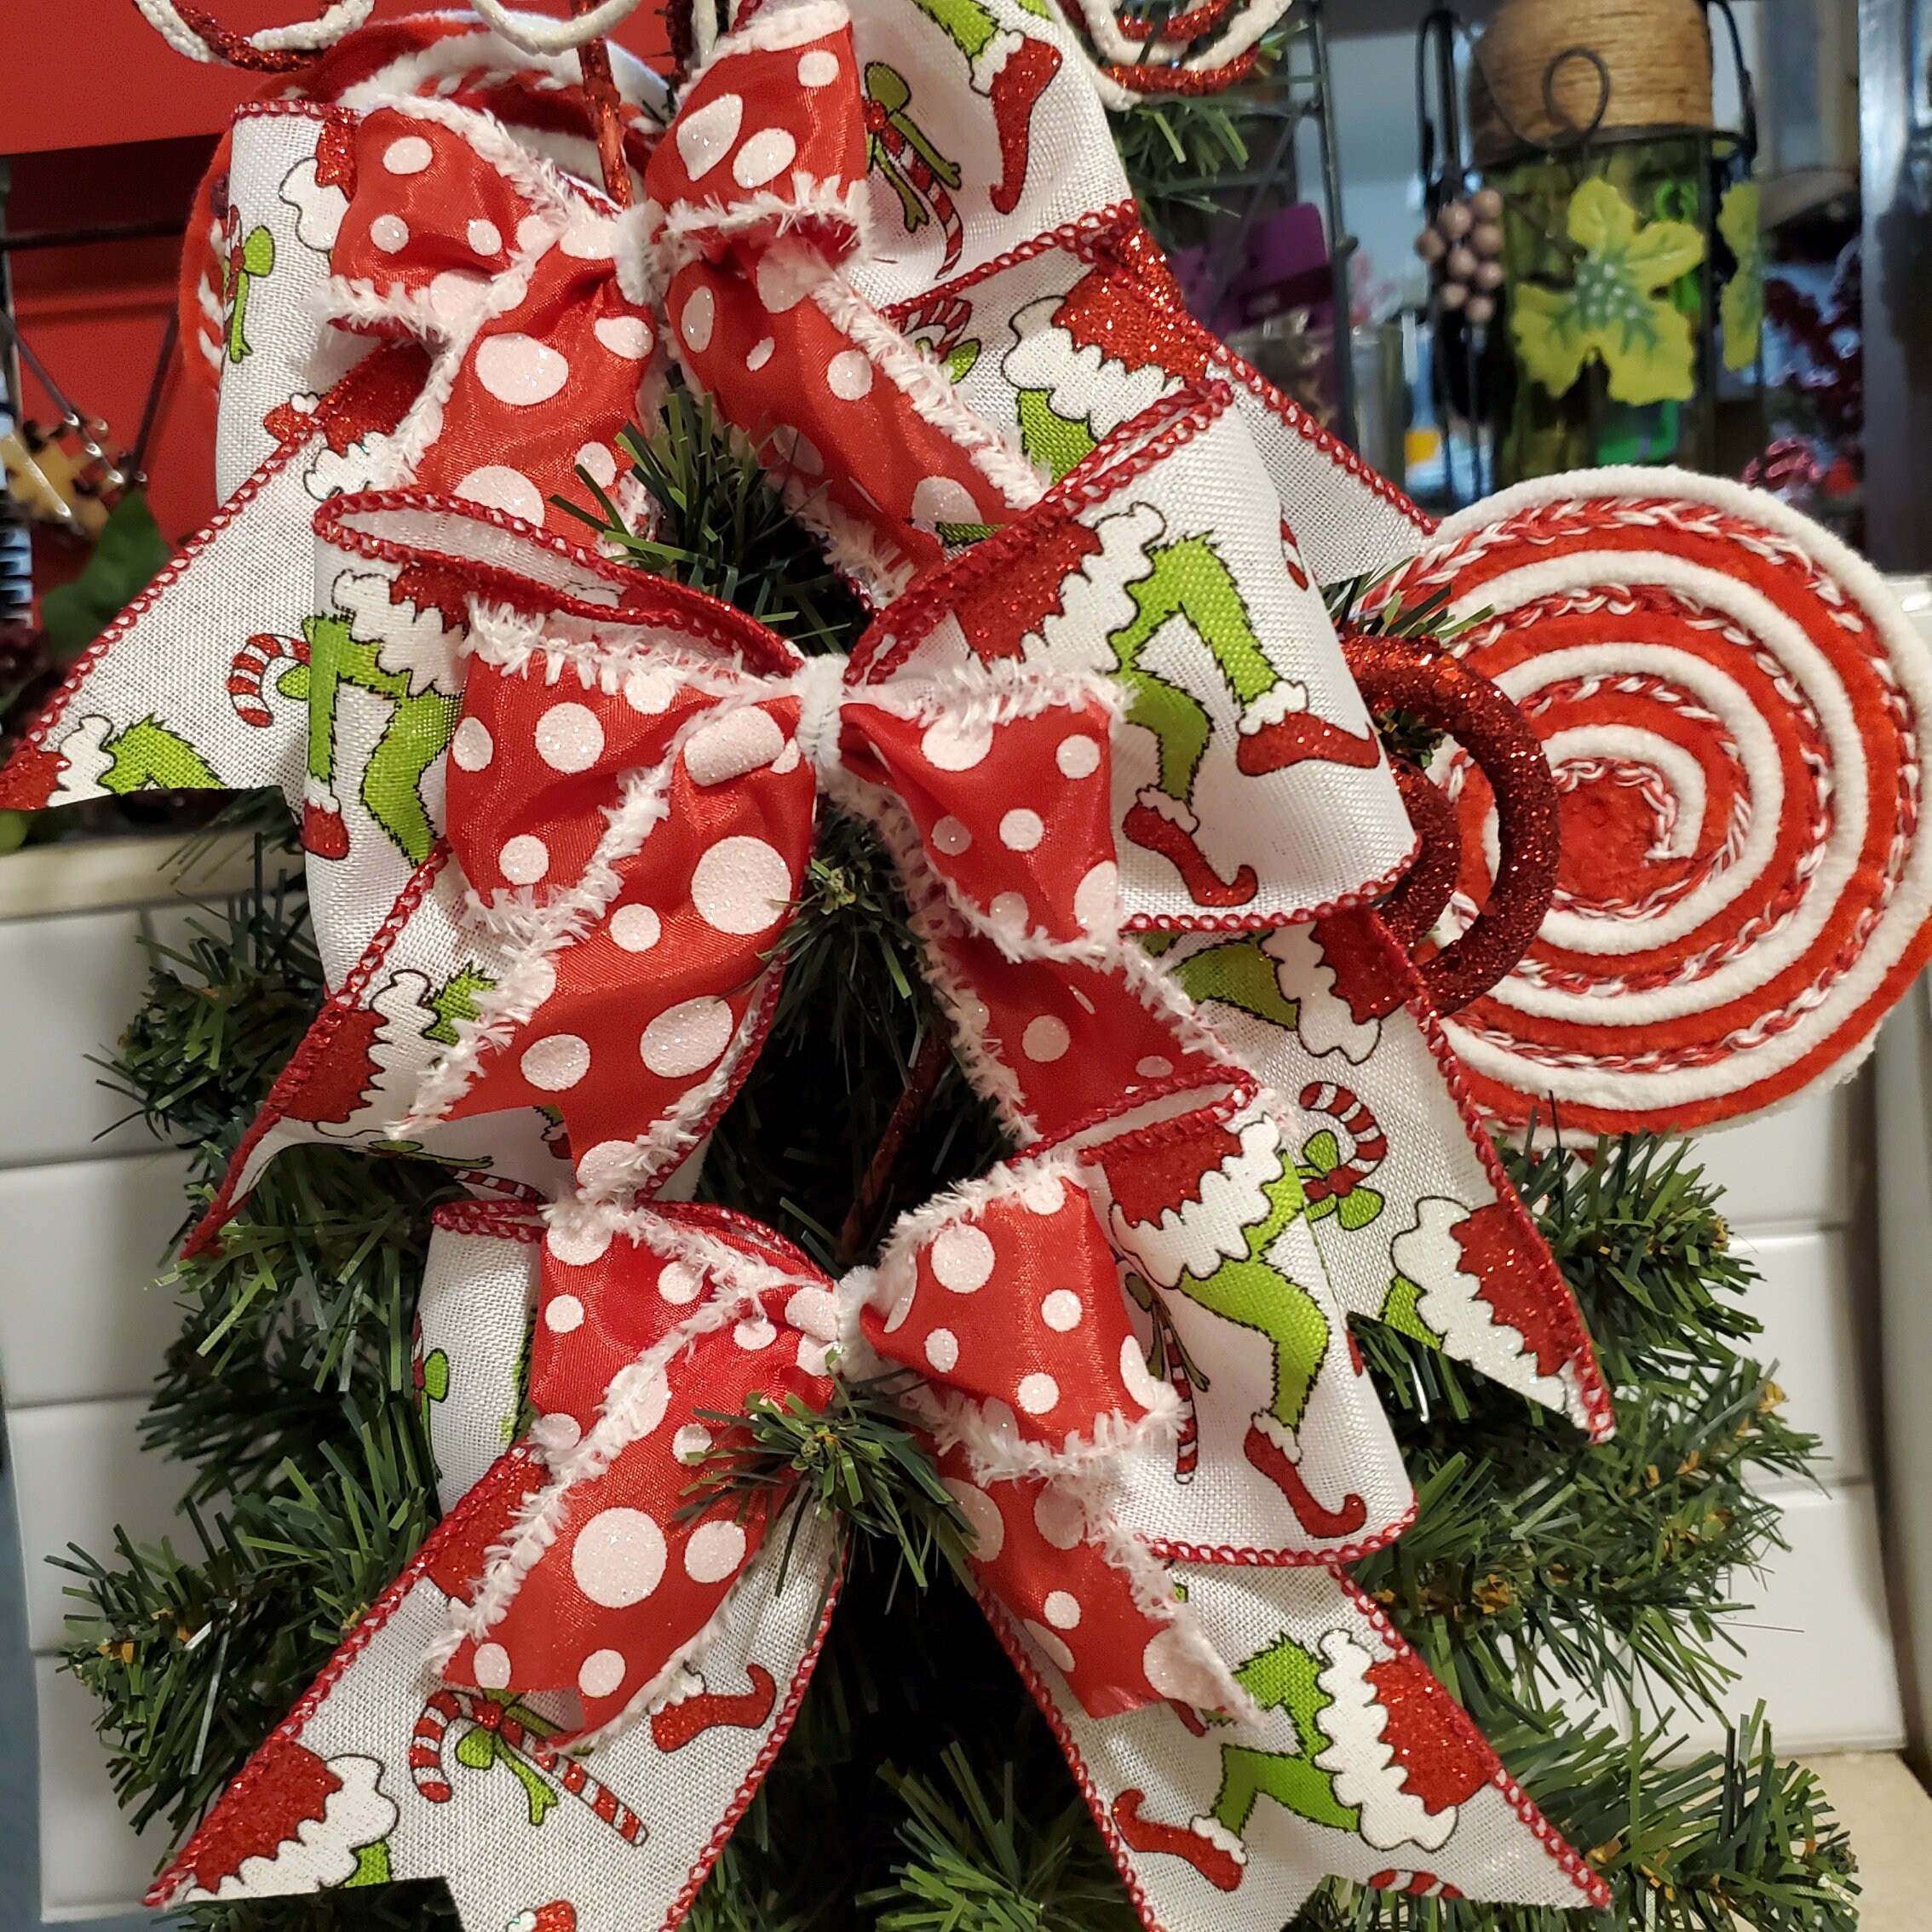 Christmas Tree Topper Bow, Grinch Tree Topper Bow, Christmas Mailbox D –  Amour Front Door